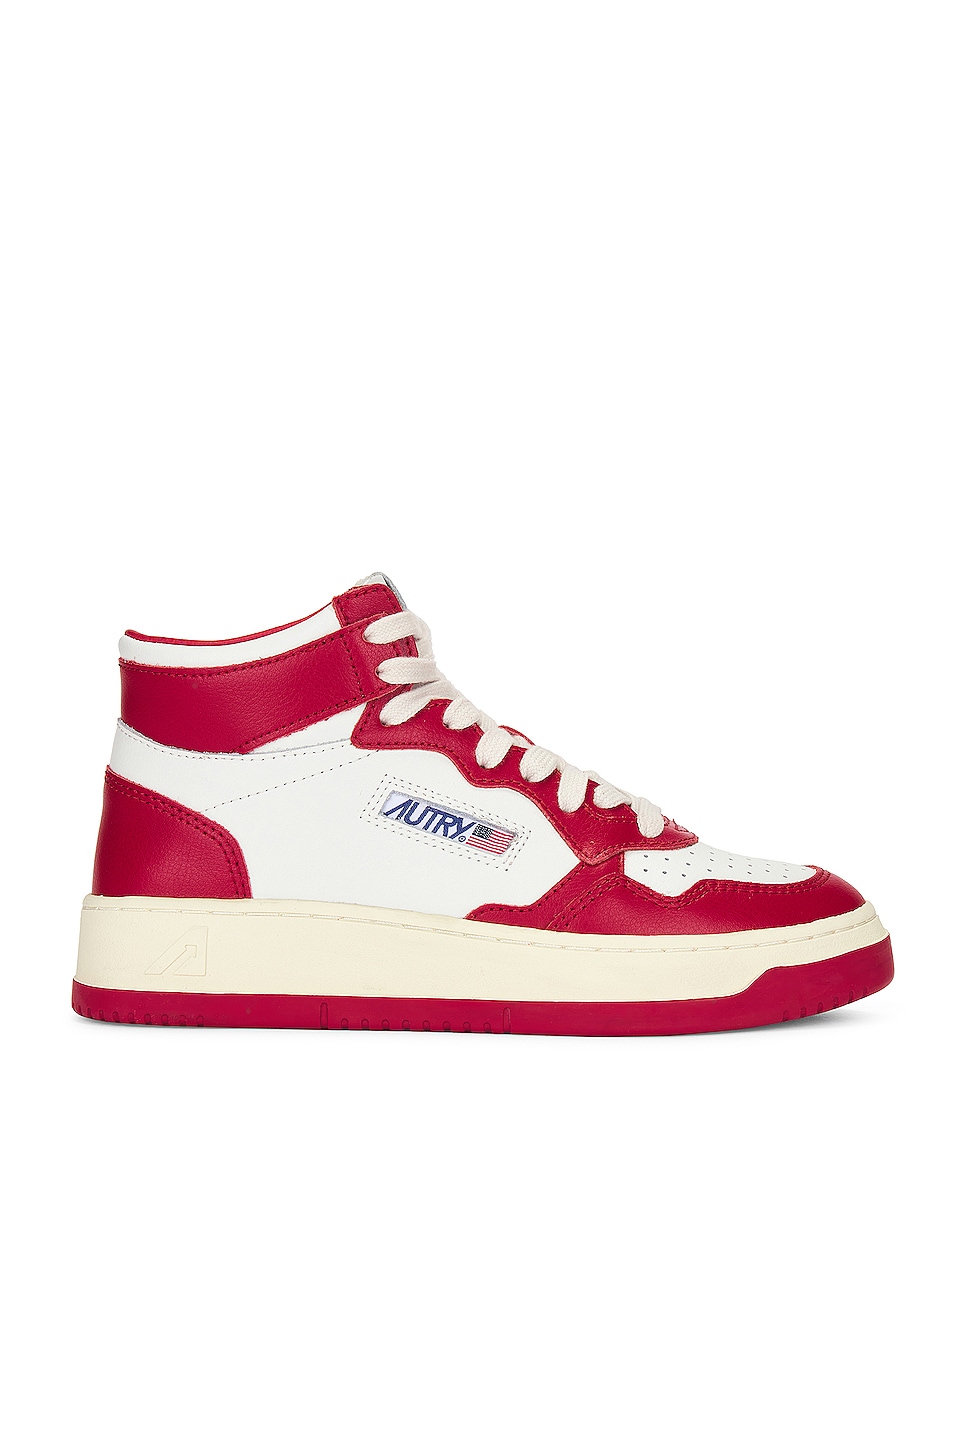 Image 1 of Autry Bicolor Medalist Mid Sneaker in White & Red